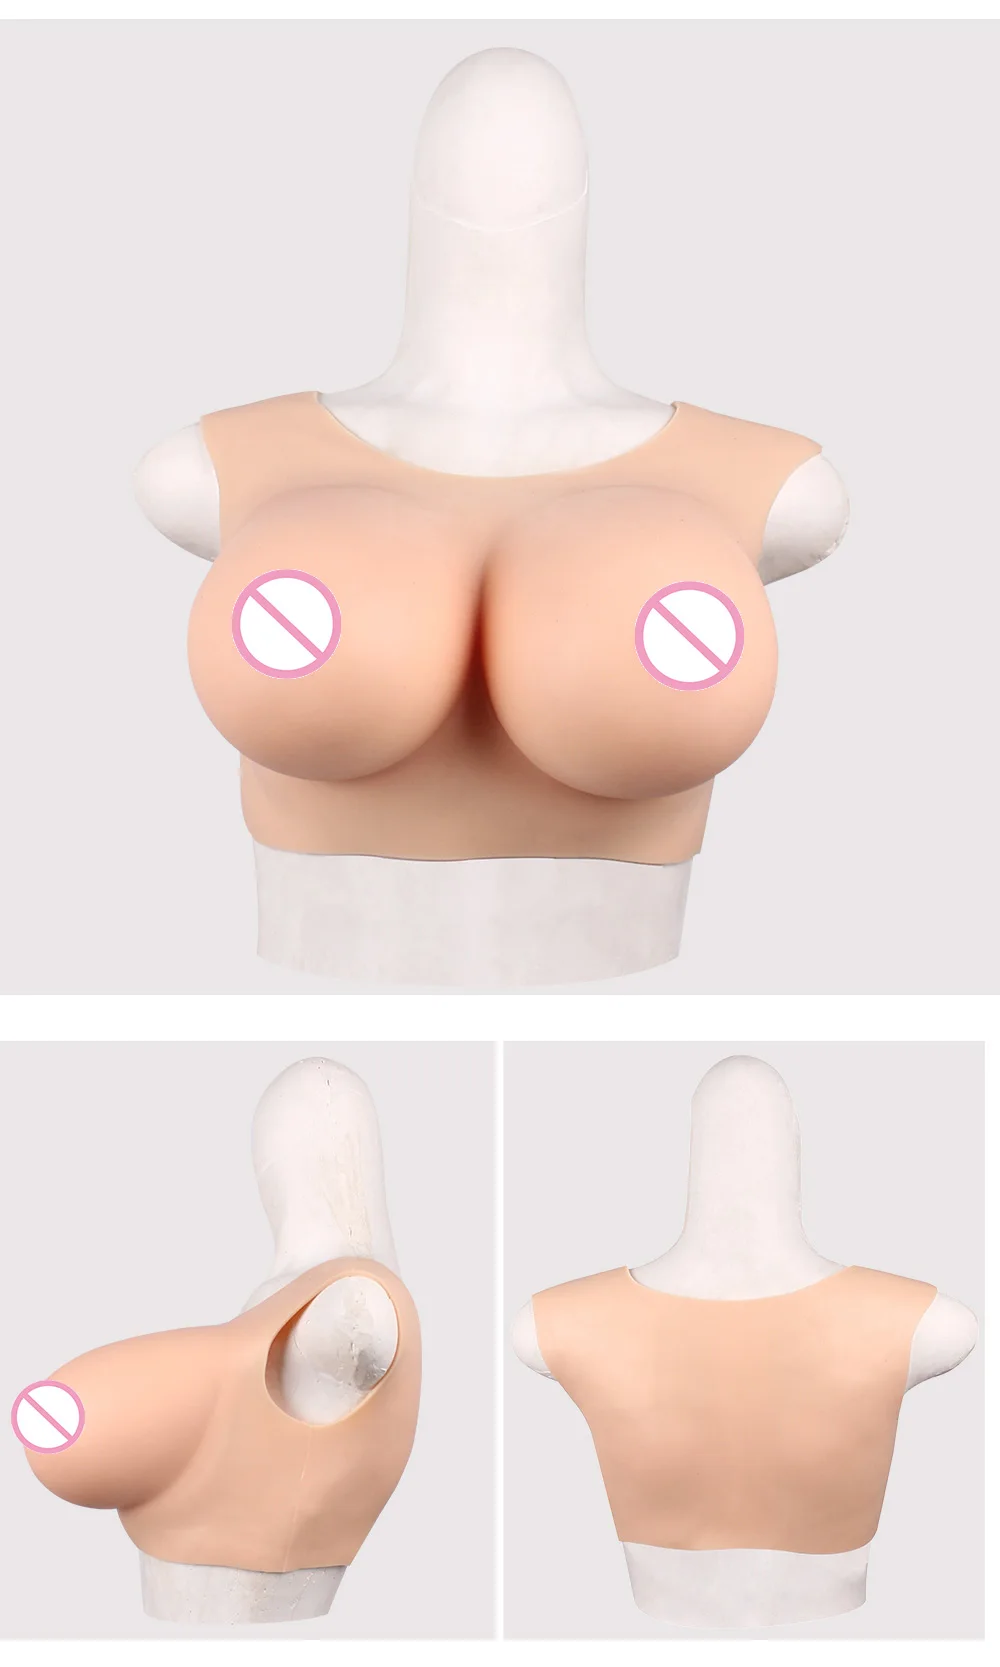 Eyung Low collar Silicone Breast Forms Realistic Fake Boobs Tits Meme Enhancer For Crossdresser Drag Queen Shemale Transgender (5)